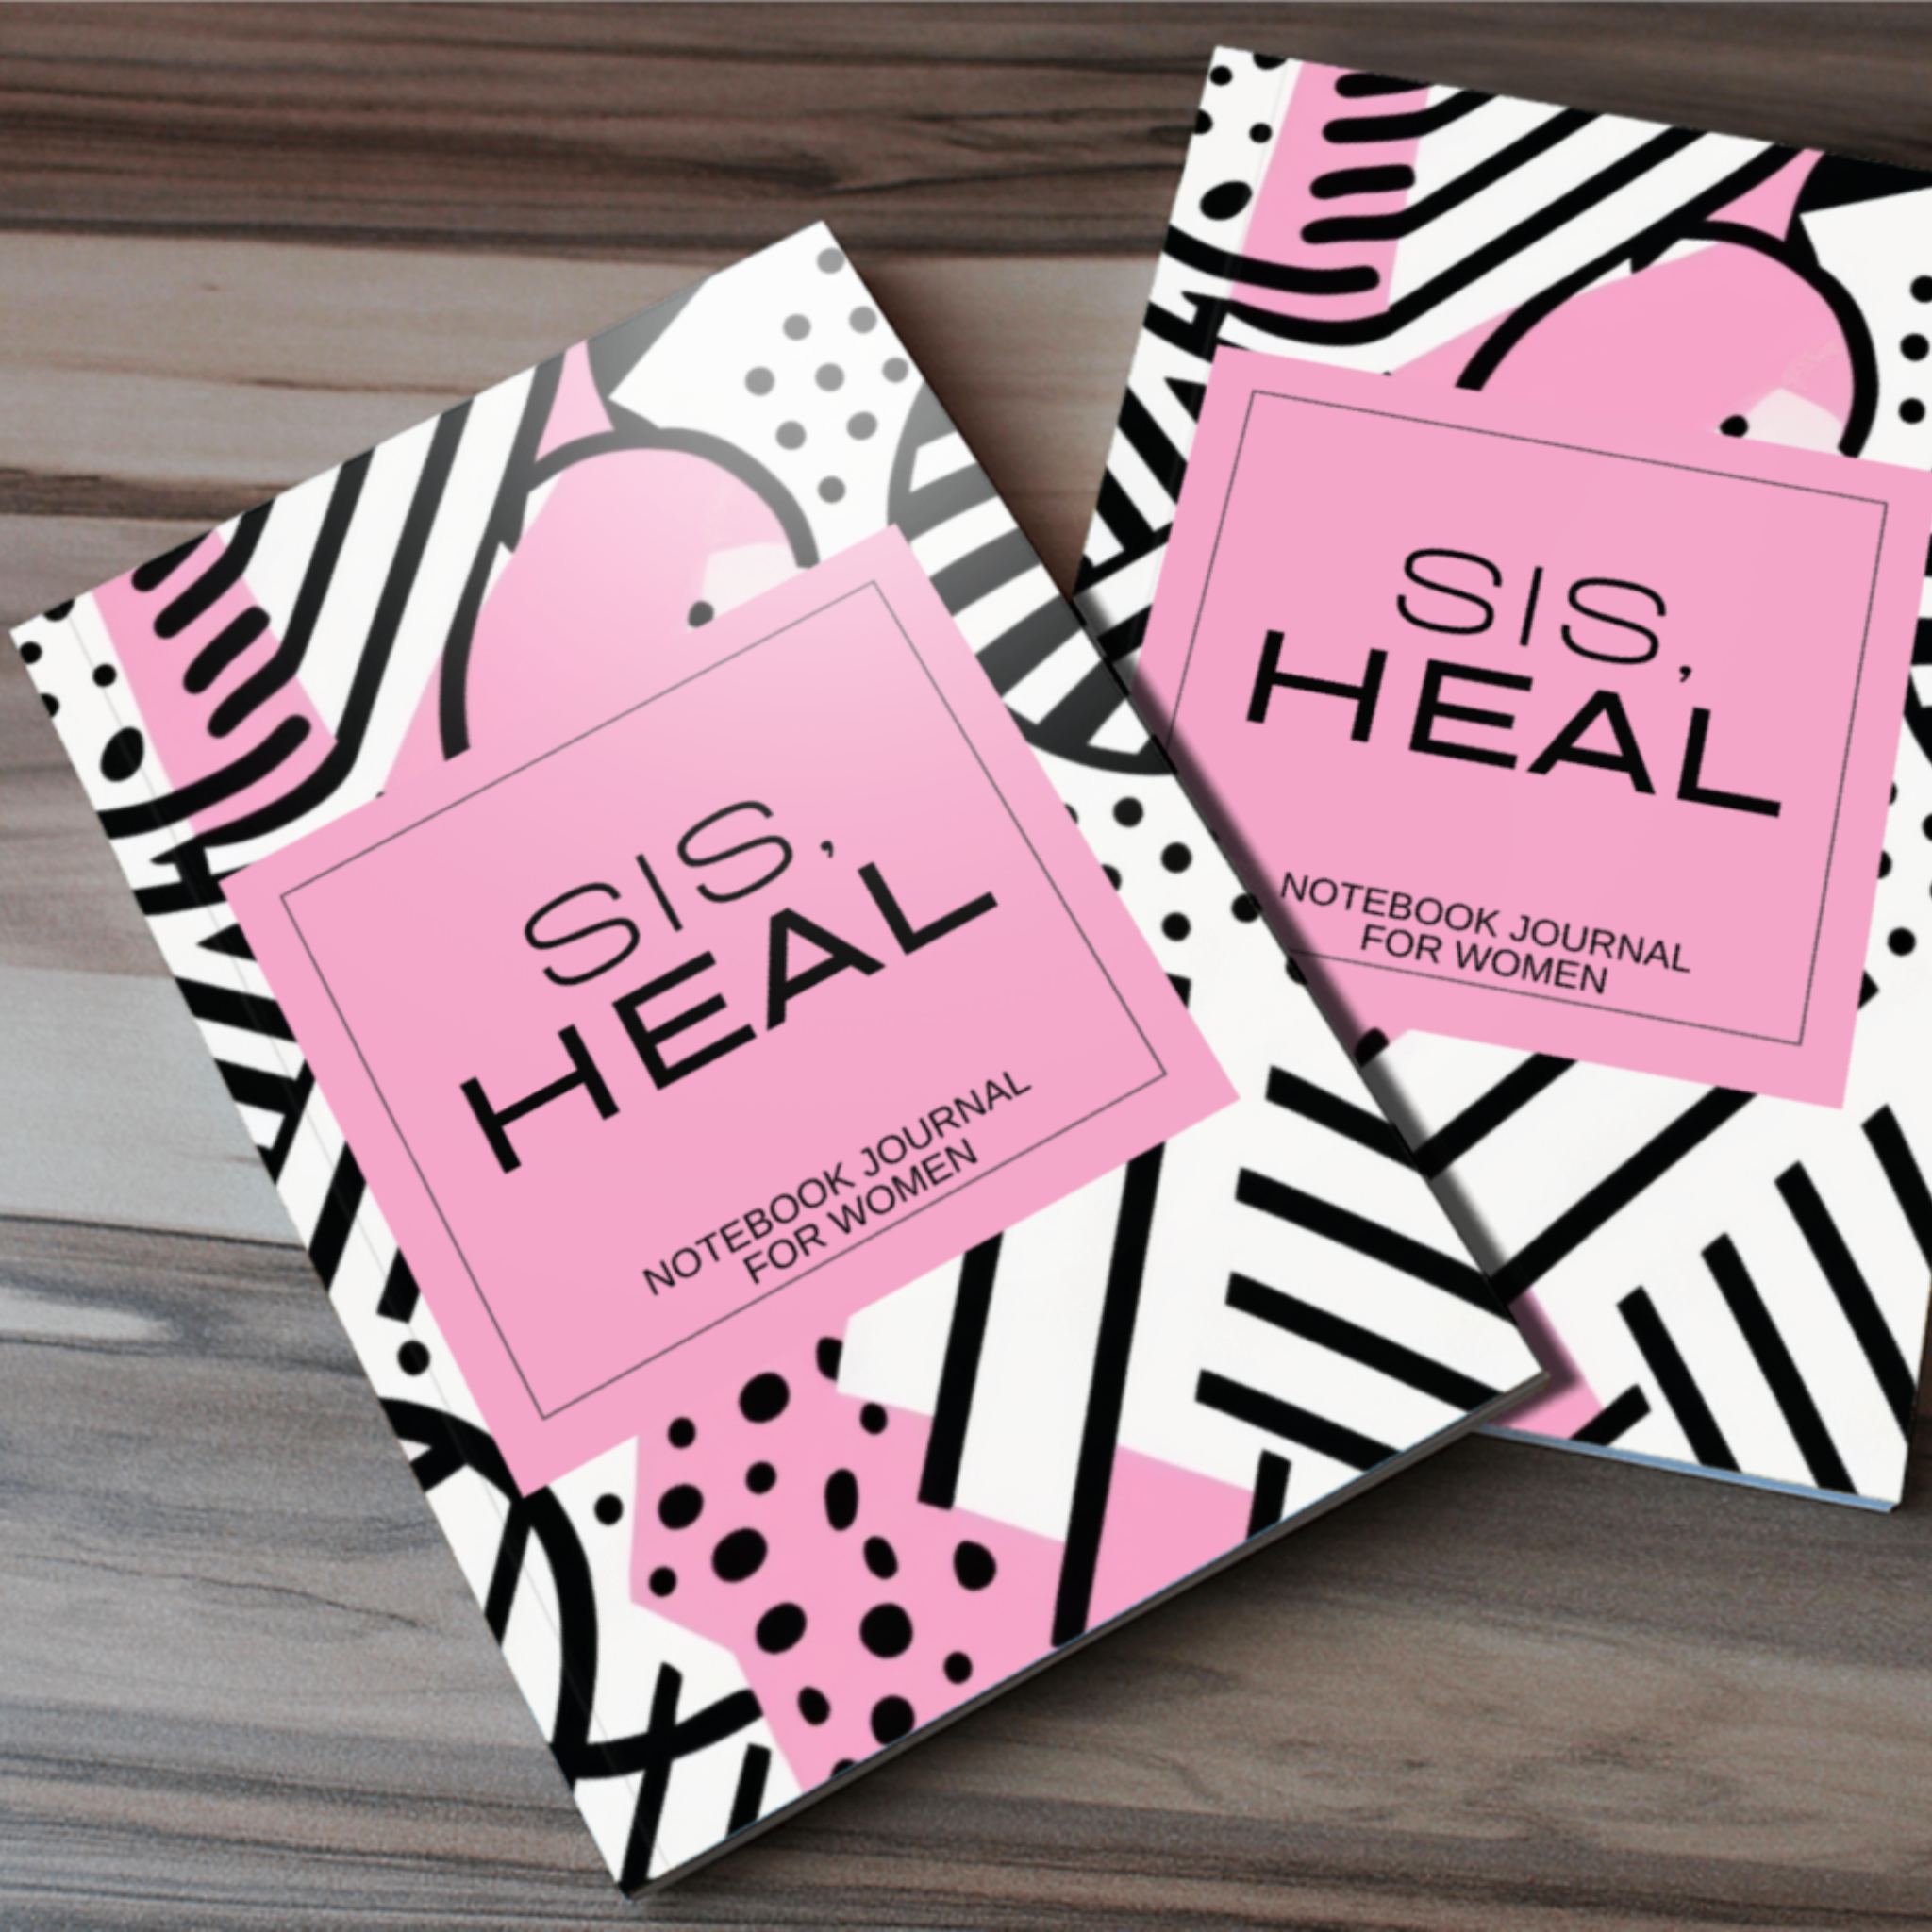 SIS Heal Journal Notebook for KDP/Amazon